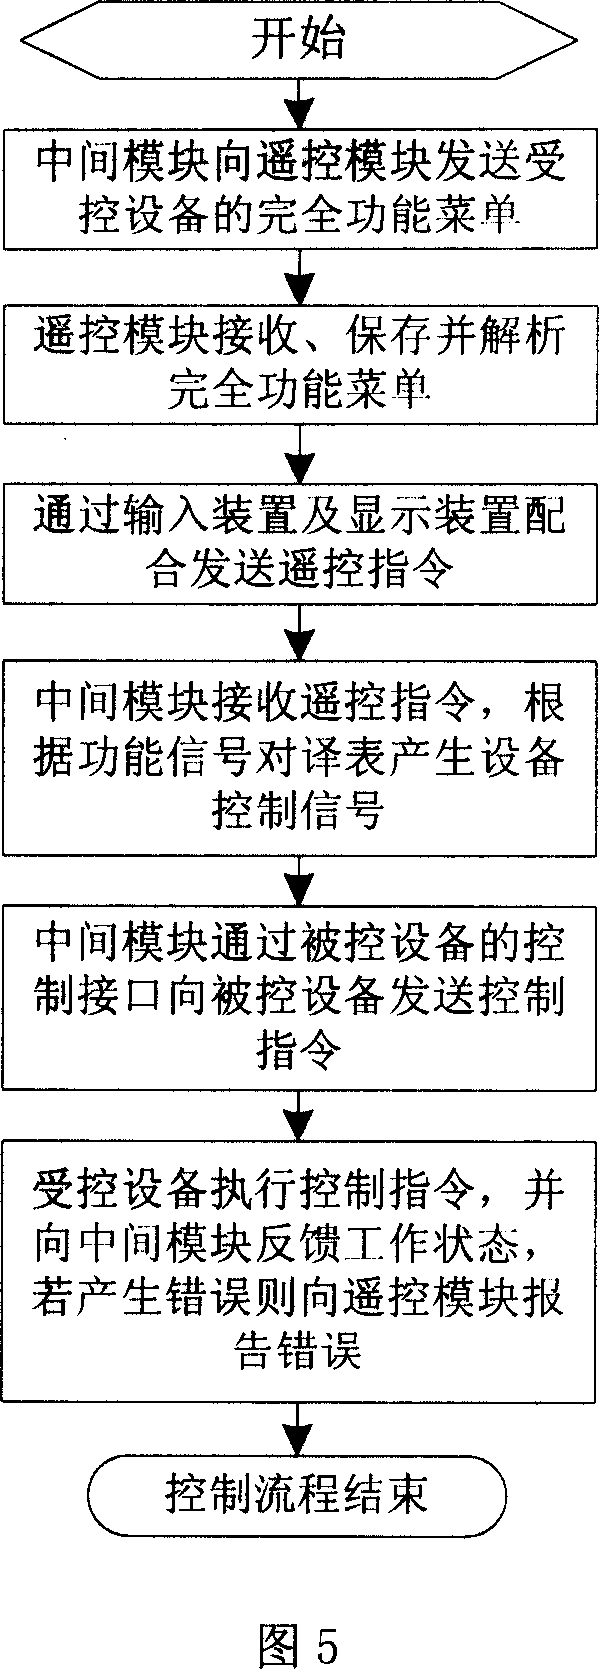 Selective intelligent remote control system and method